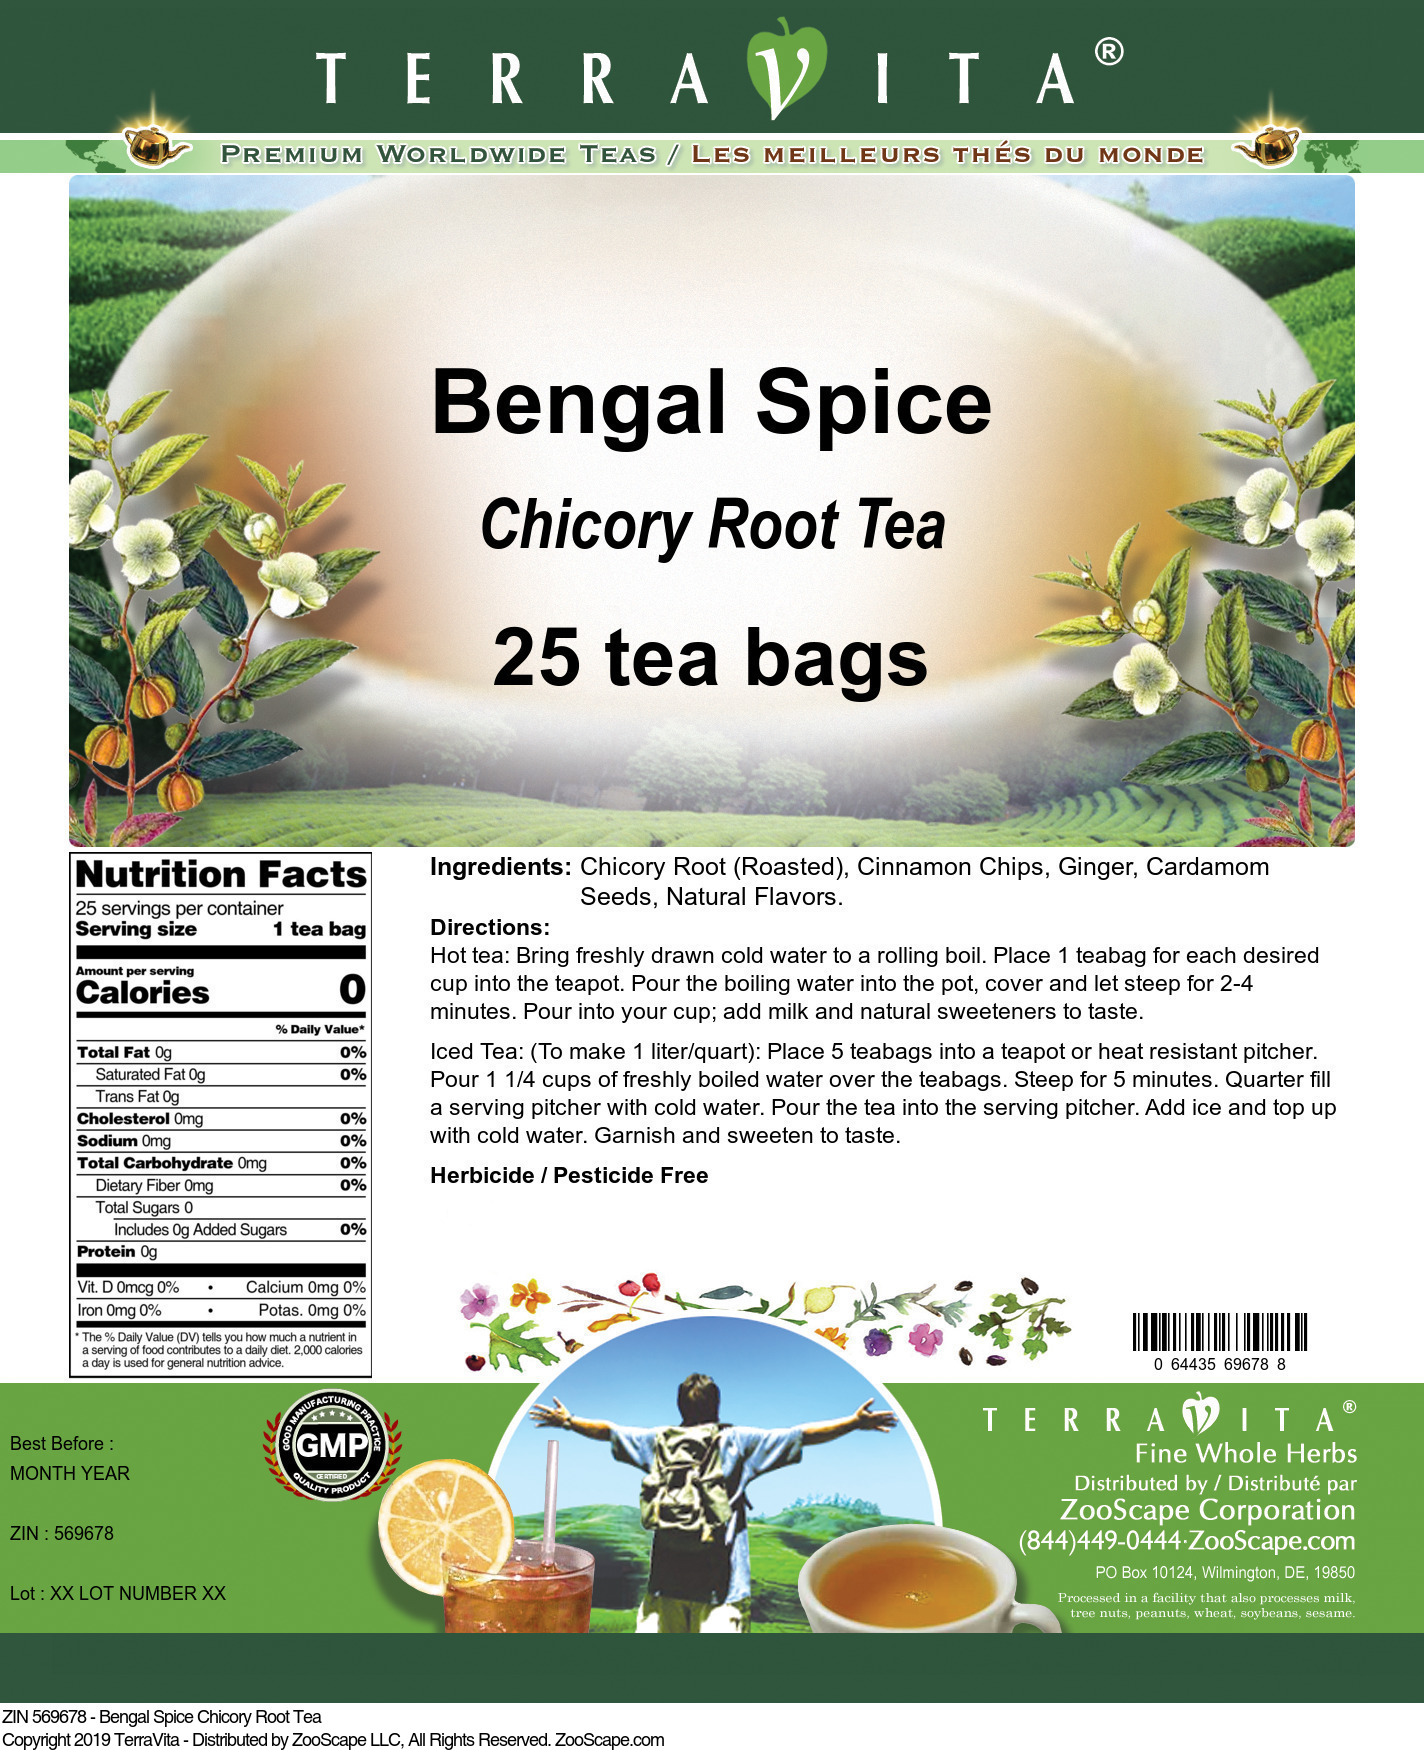 Bengal Spice Chicory Root Tea - Label